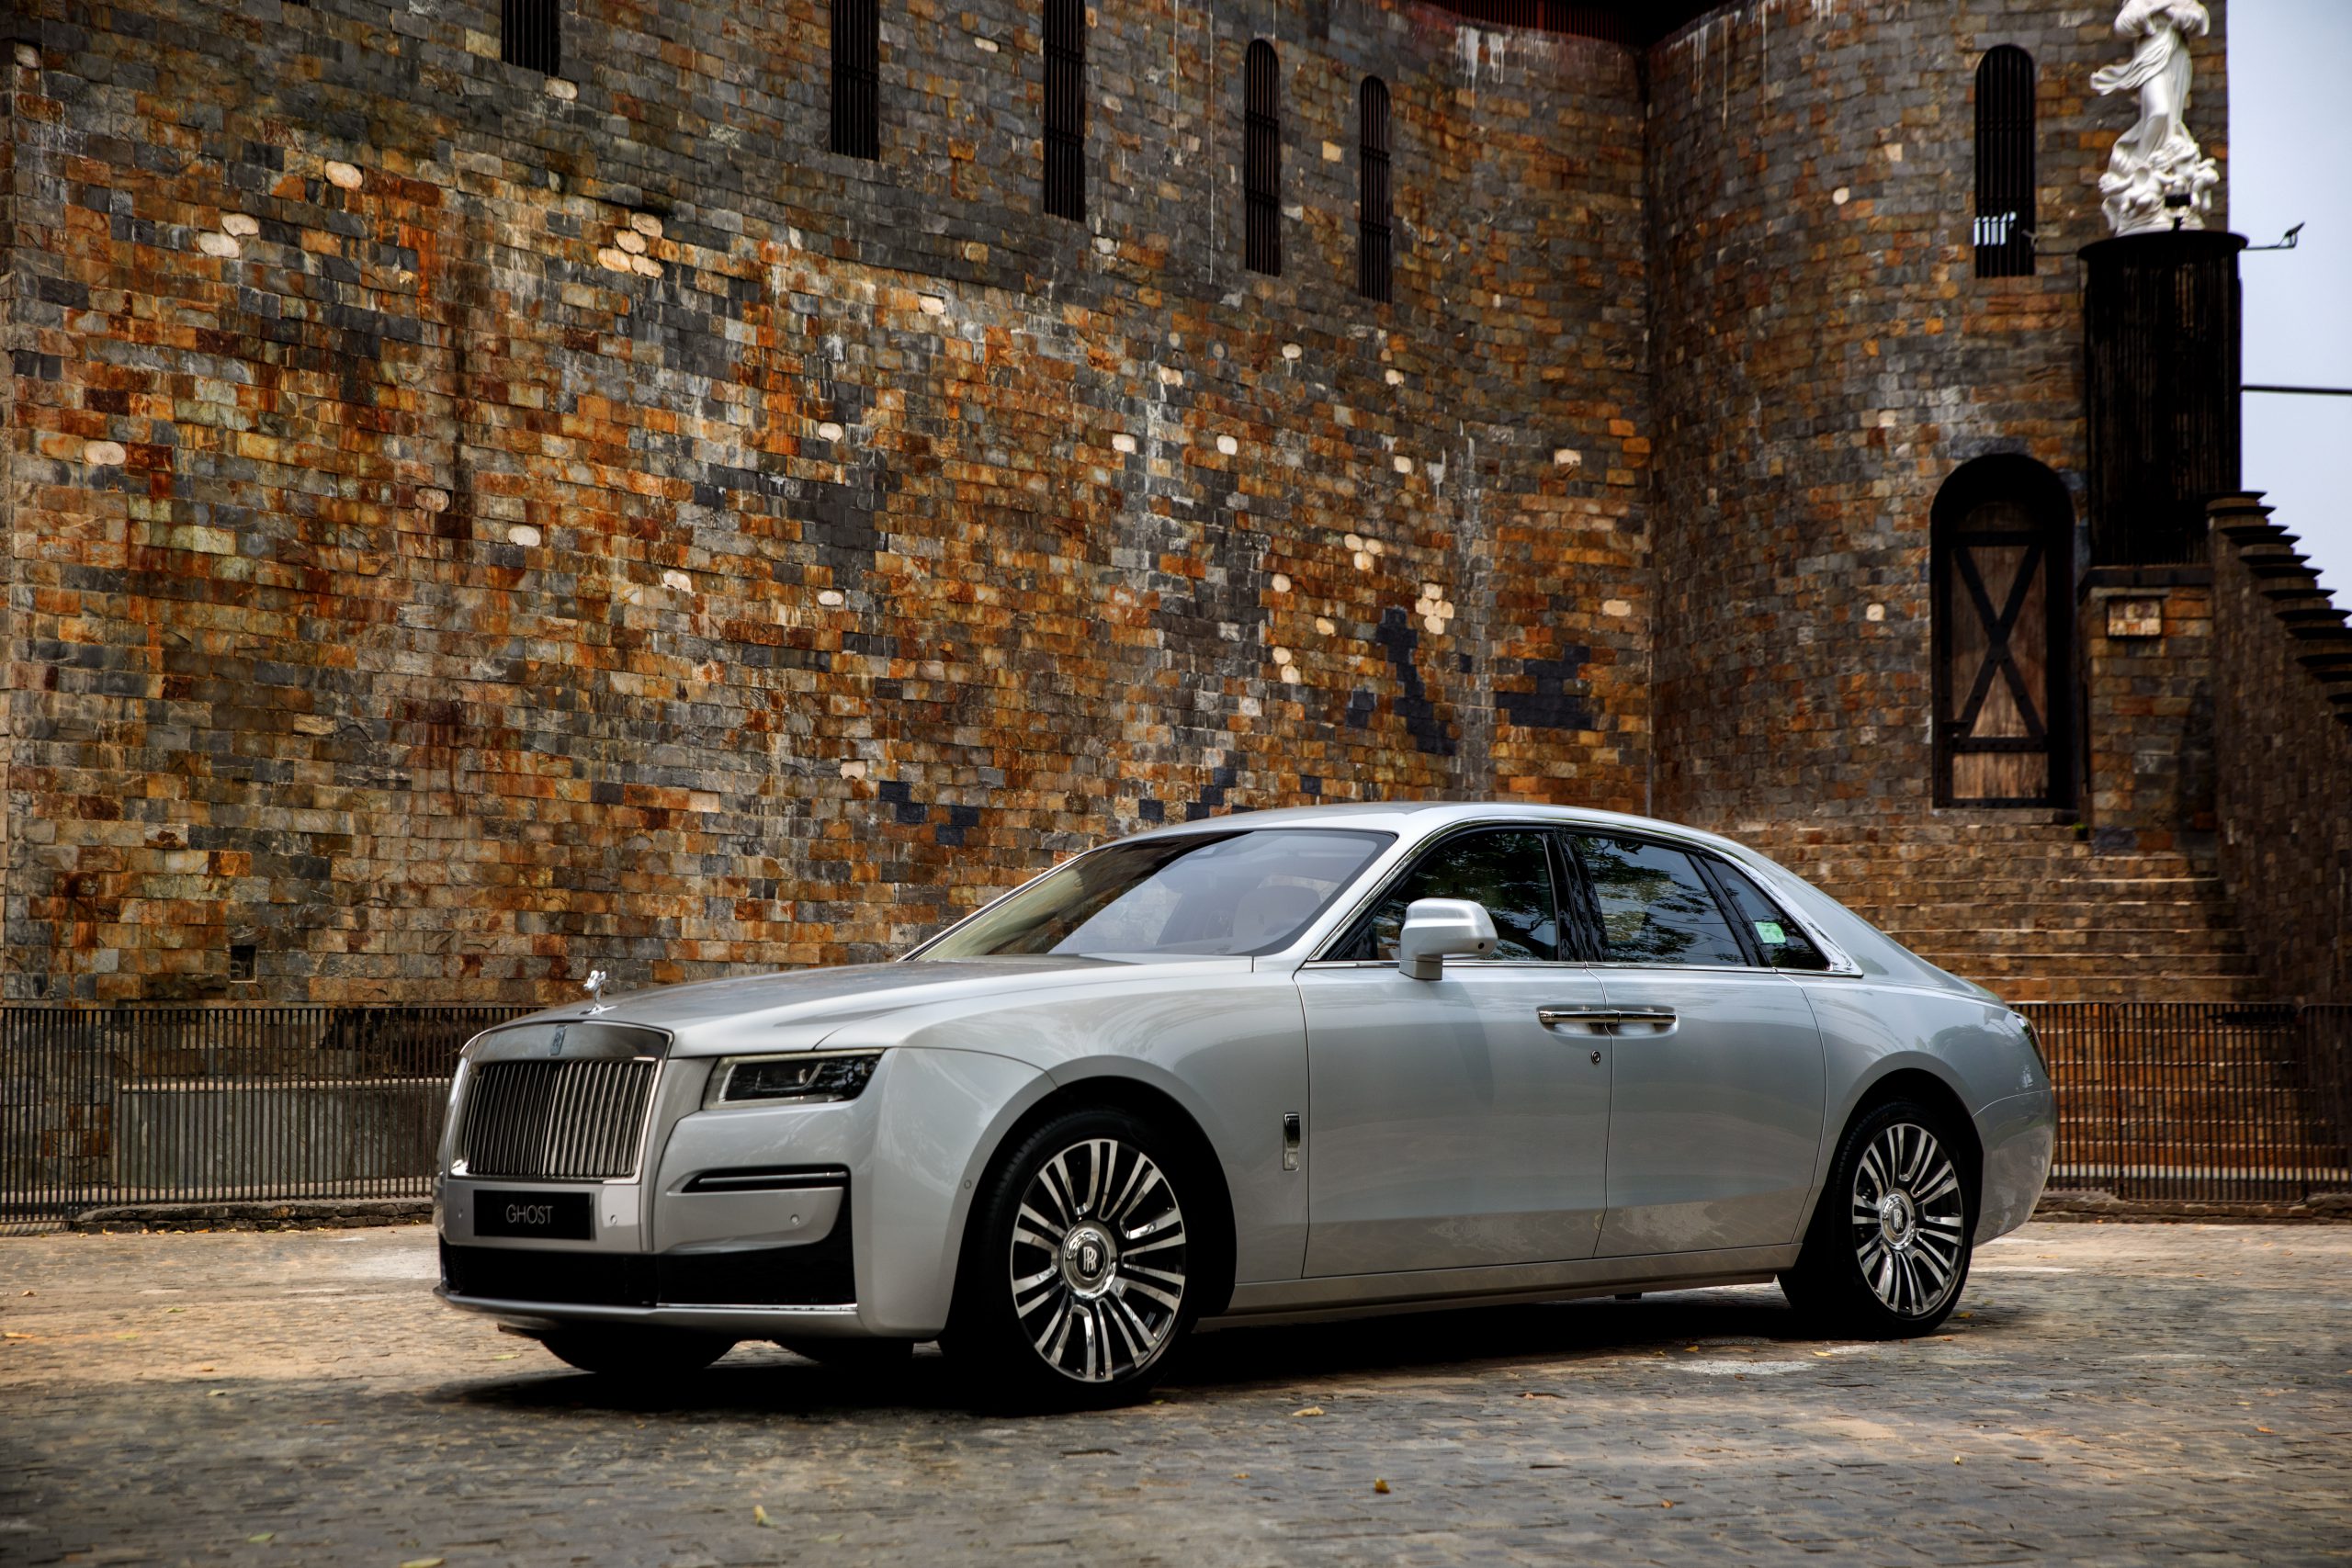 Bespoke RollsRoyce Ghost Extended Is The First Project From Brands Dubai  Office  Carscoops